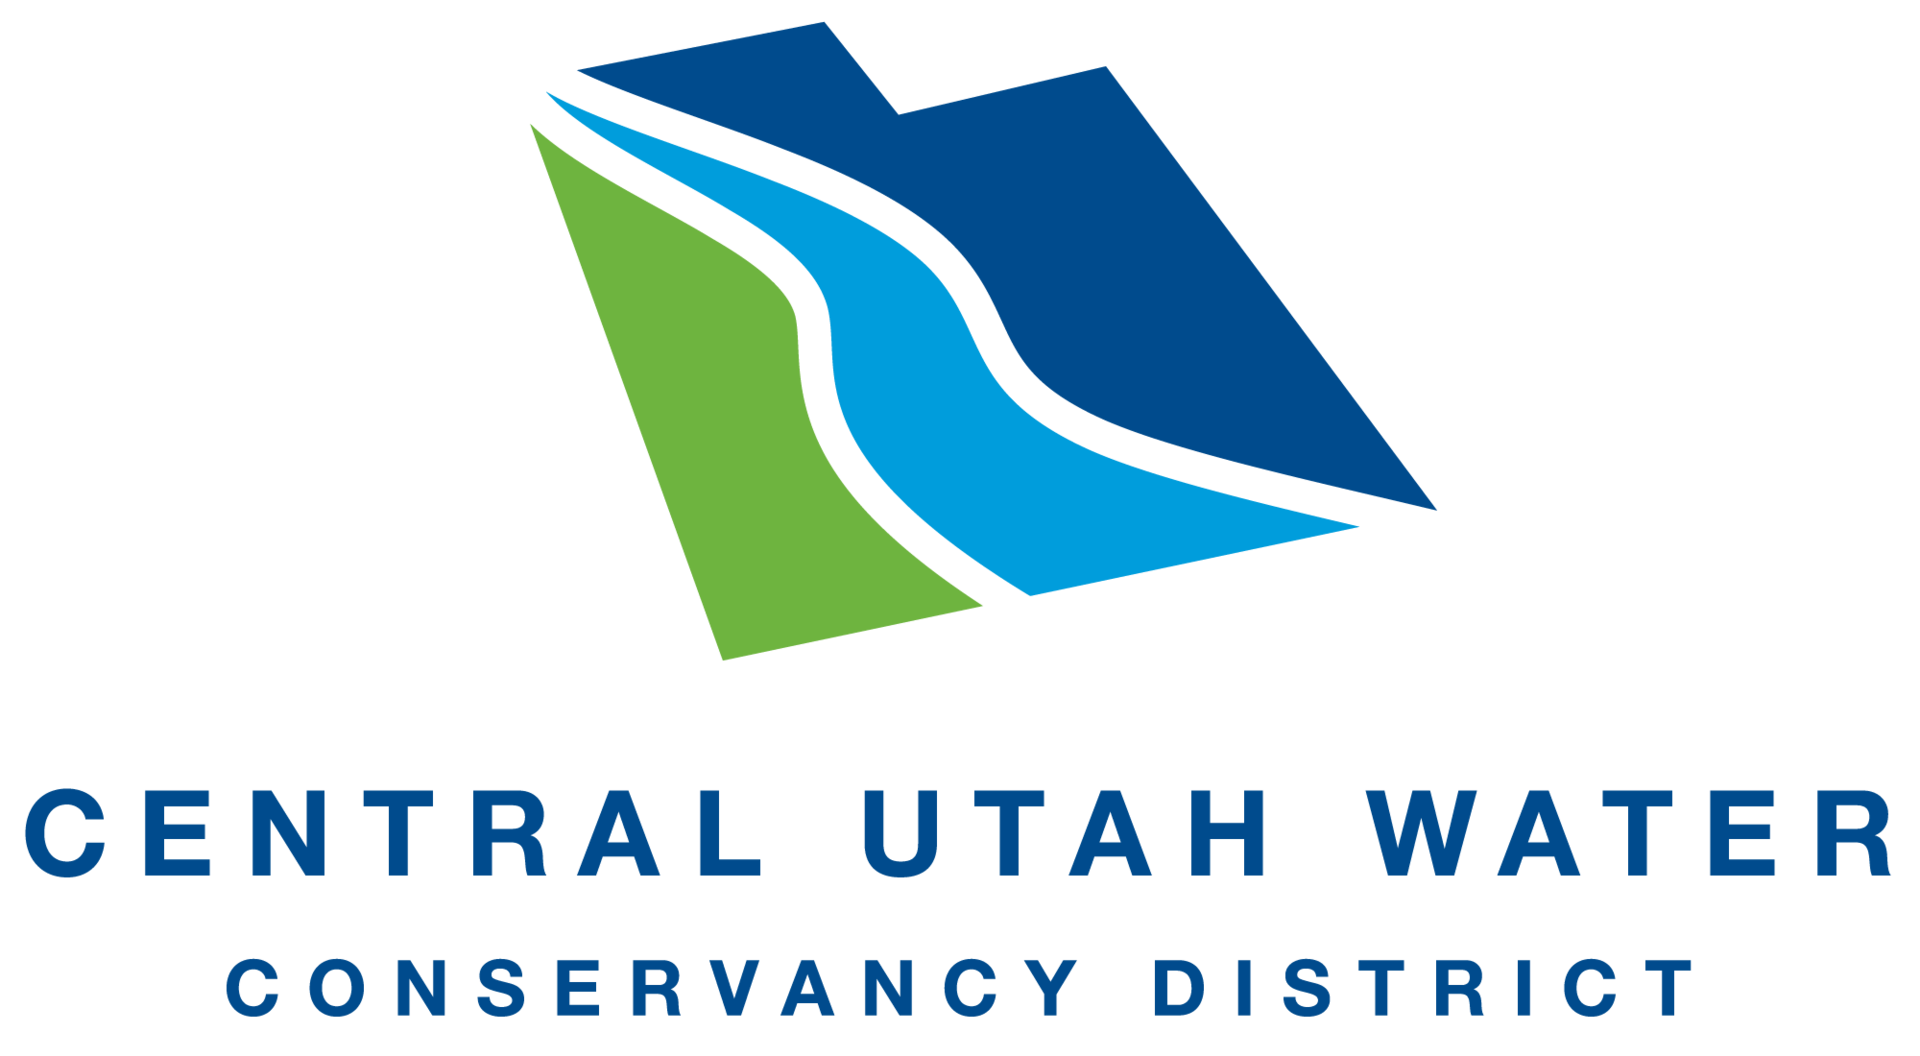 Central Utah Water Conservancy District